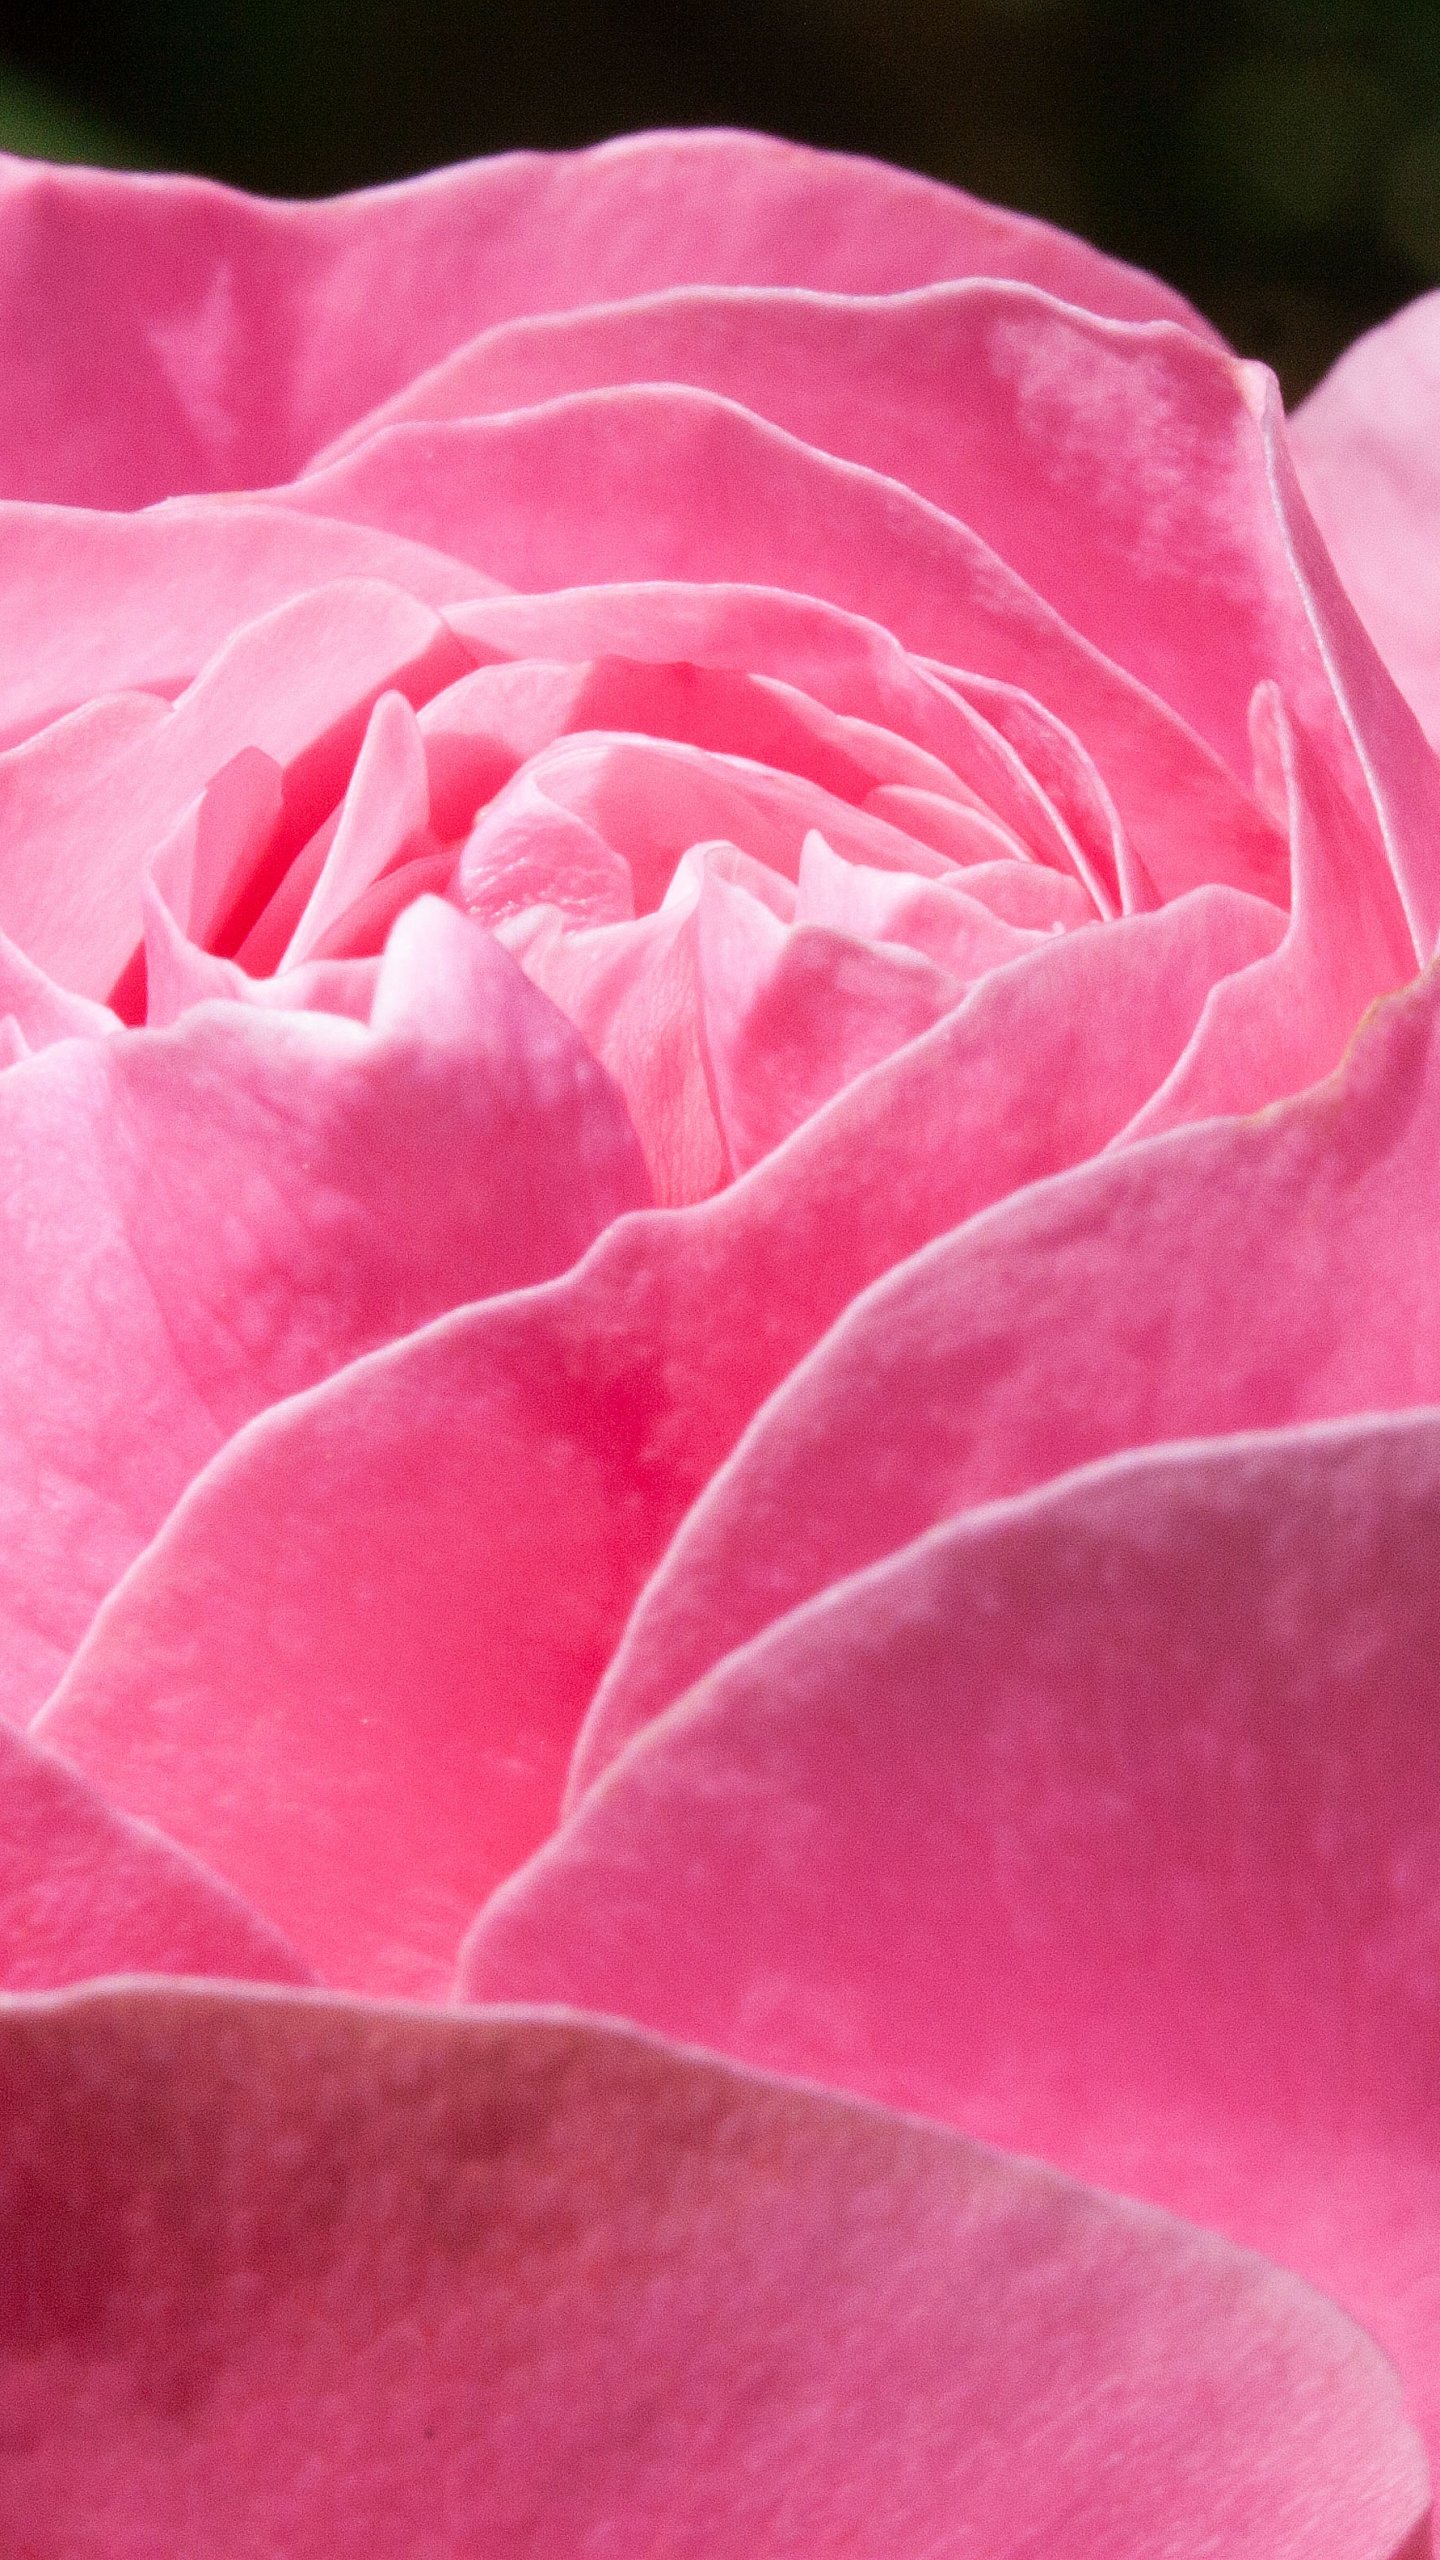 Pink Rose Hd Wallpapers For Mobile - 1440x2560 Wallpaper 